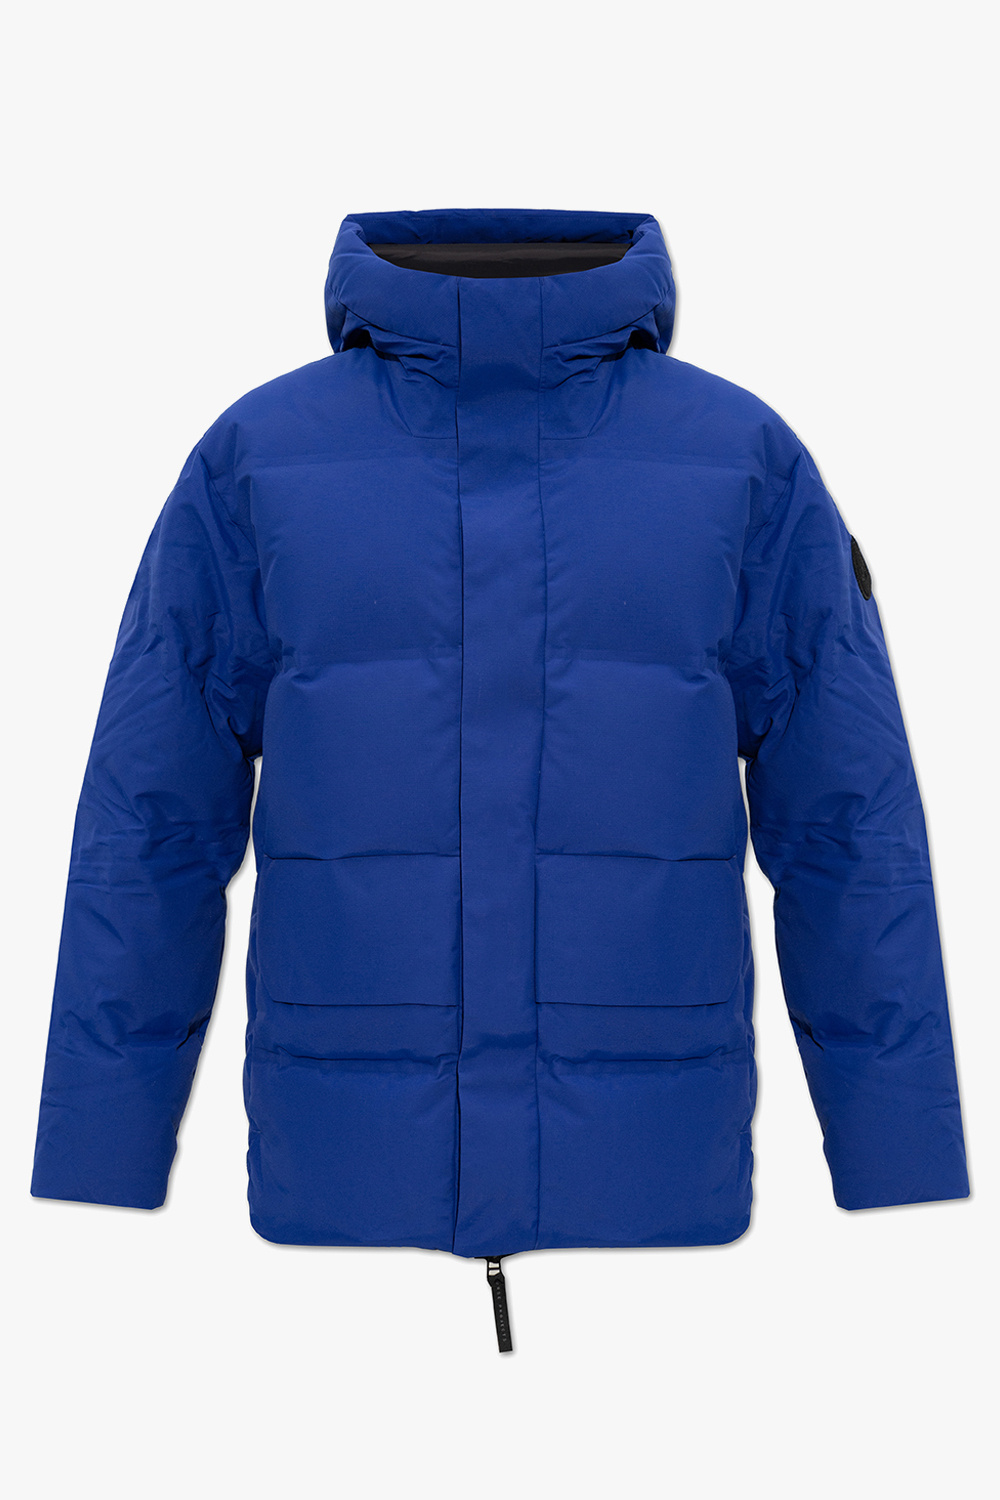 Norse Projects ‘Mountain’ down jacket